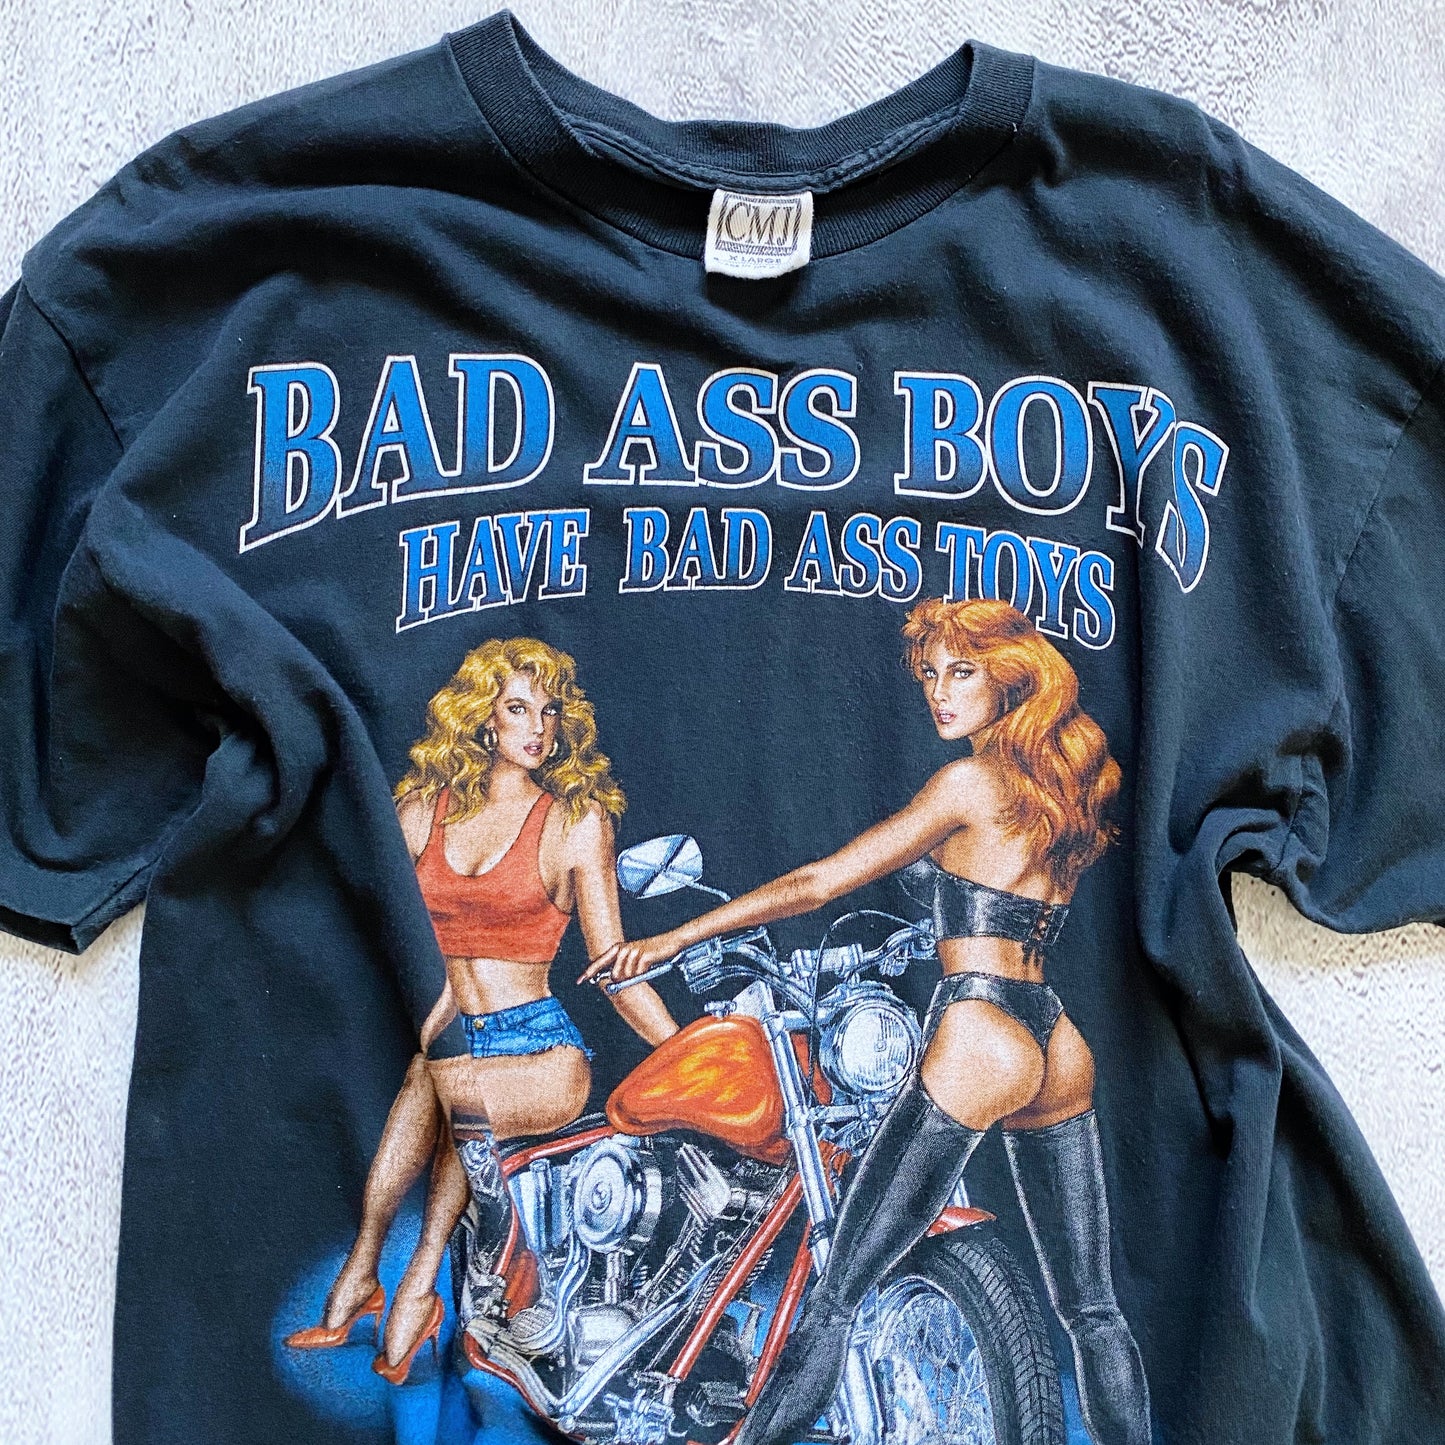 VINTAGE SINGLE STITCH "BAD ASS BOYS HAVE BAD ASS TOYS" TEE-1990'S SIZE XL